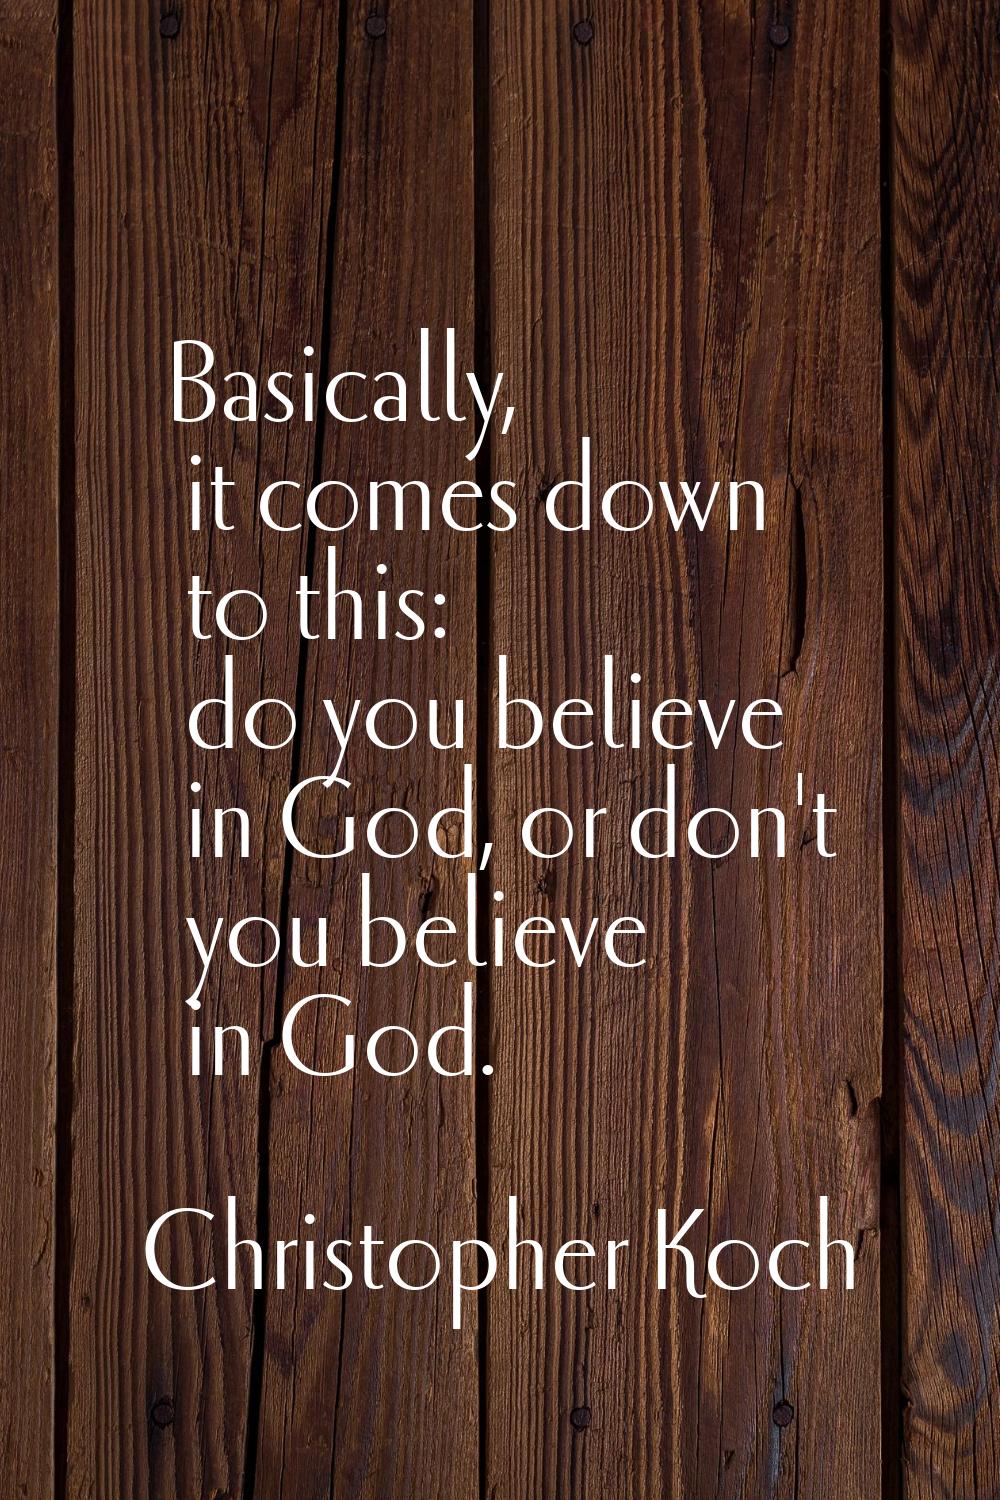 Basically, it comes down to this: do you believe in God, or don't you believe in God.